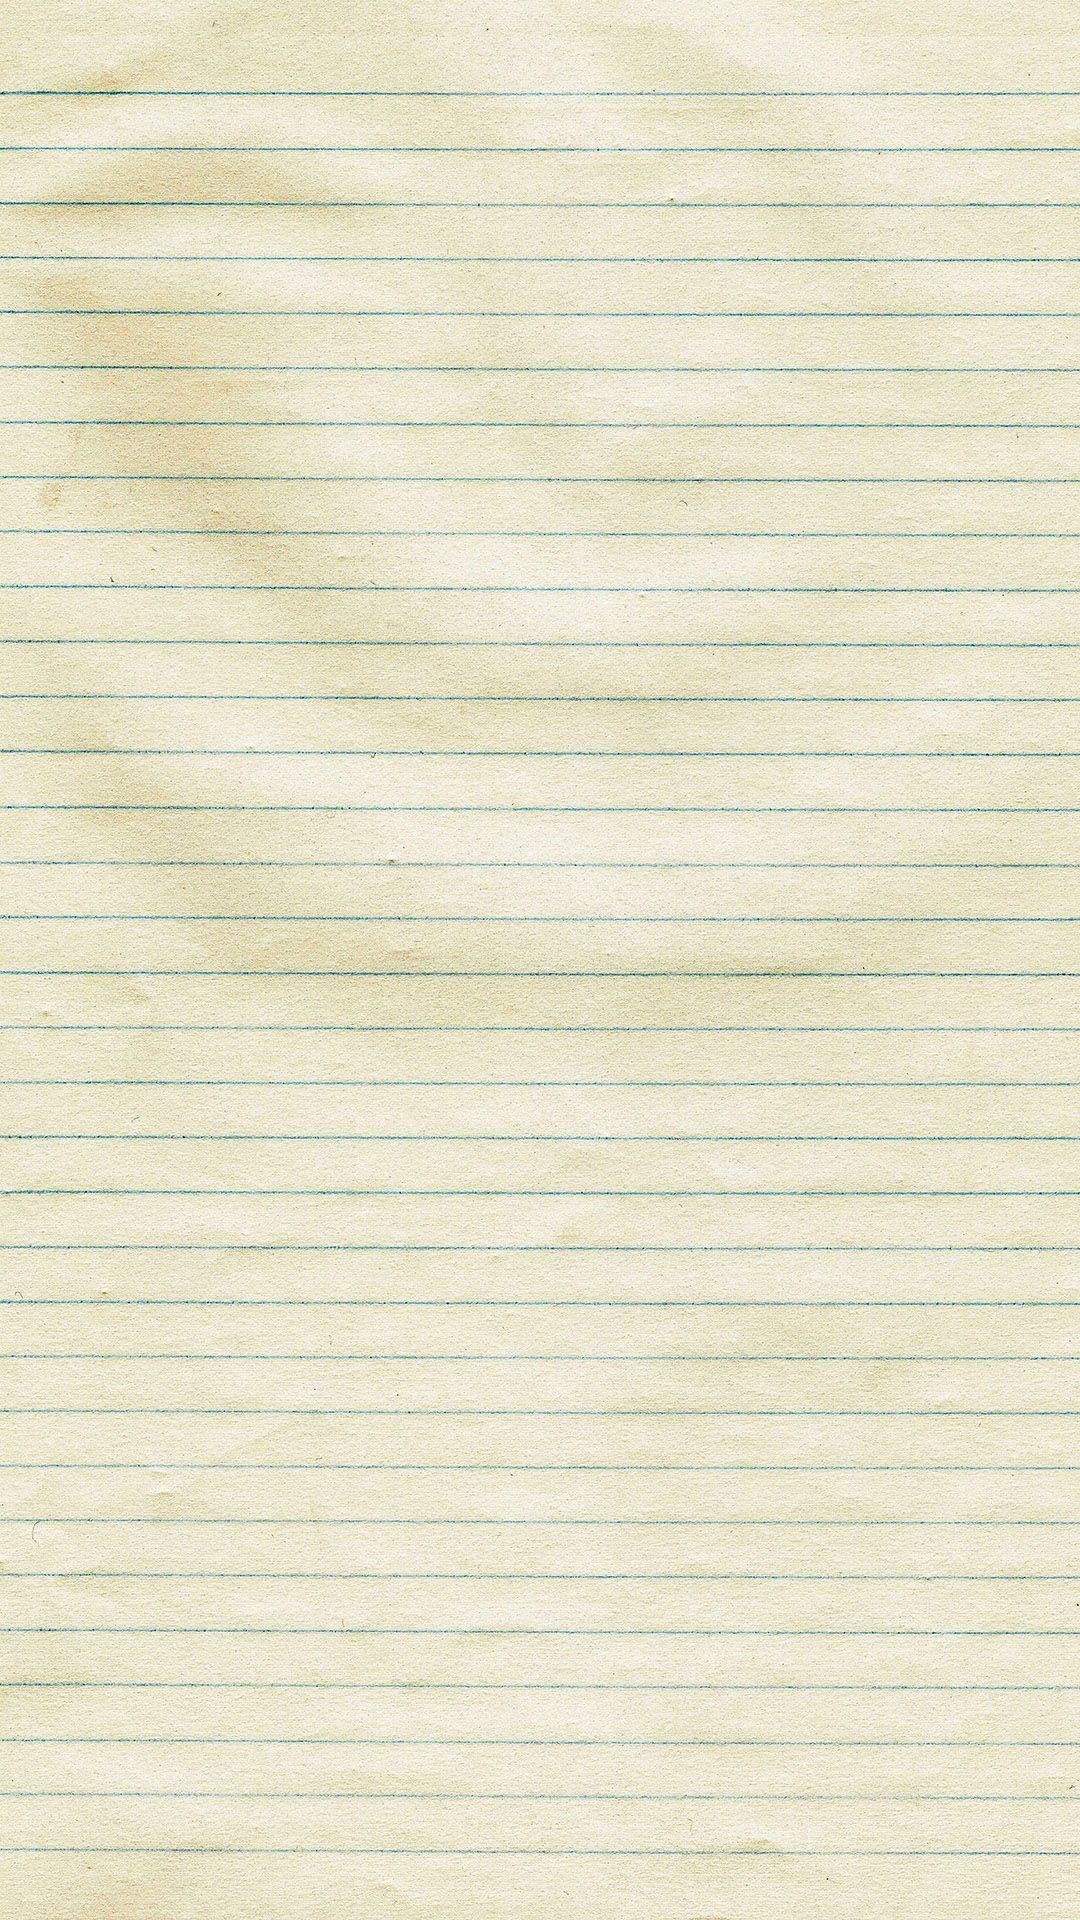 Notebook paper, Notebook paper, iPhone background, iPhone 6 wallpaper, 1080x1920 Full HD Handy